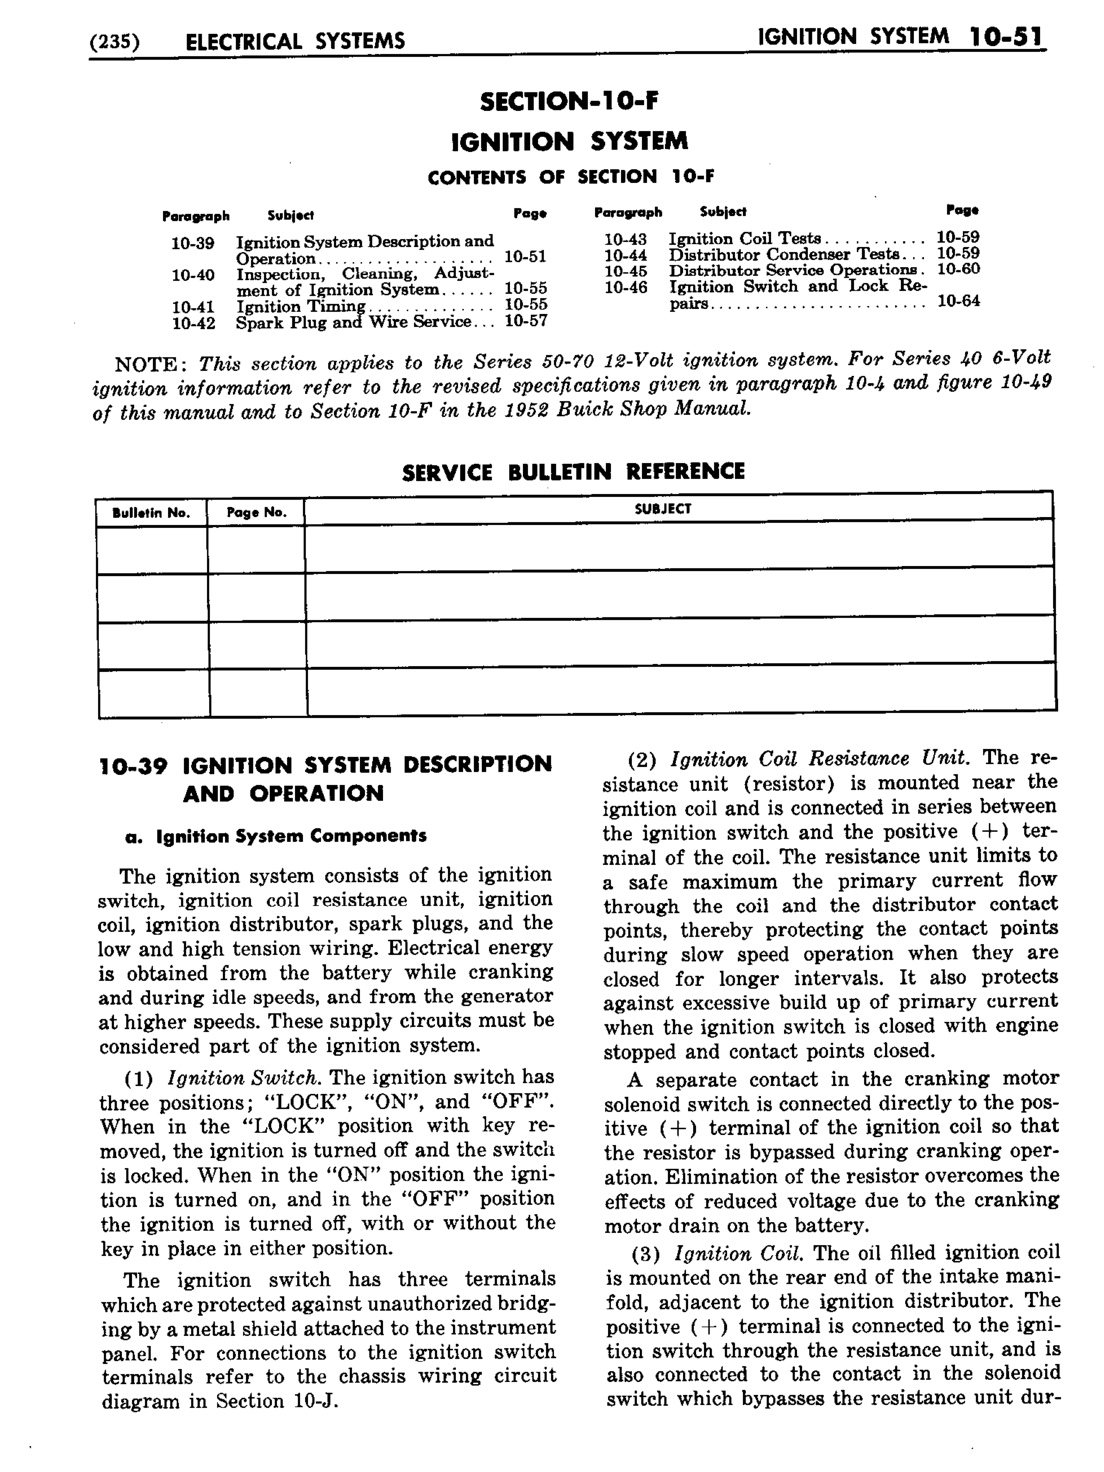 n_11 1953 Buick Shop Manual - Electrical Systems-051-051.jpg